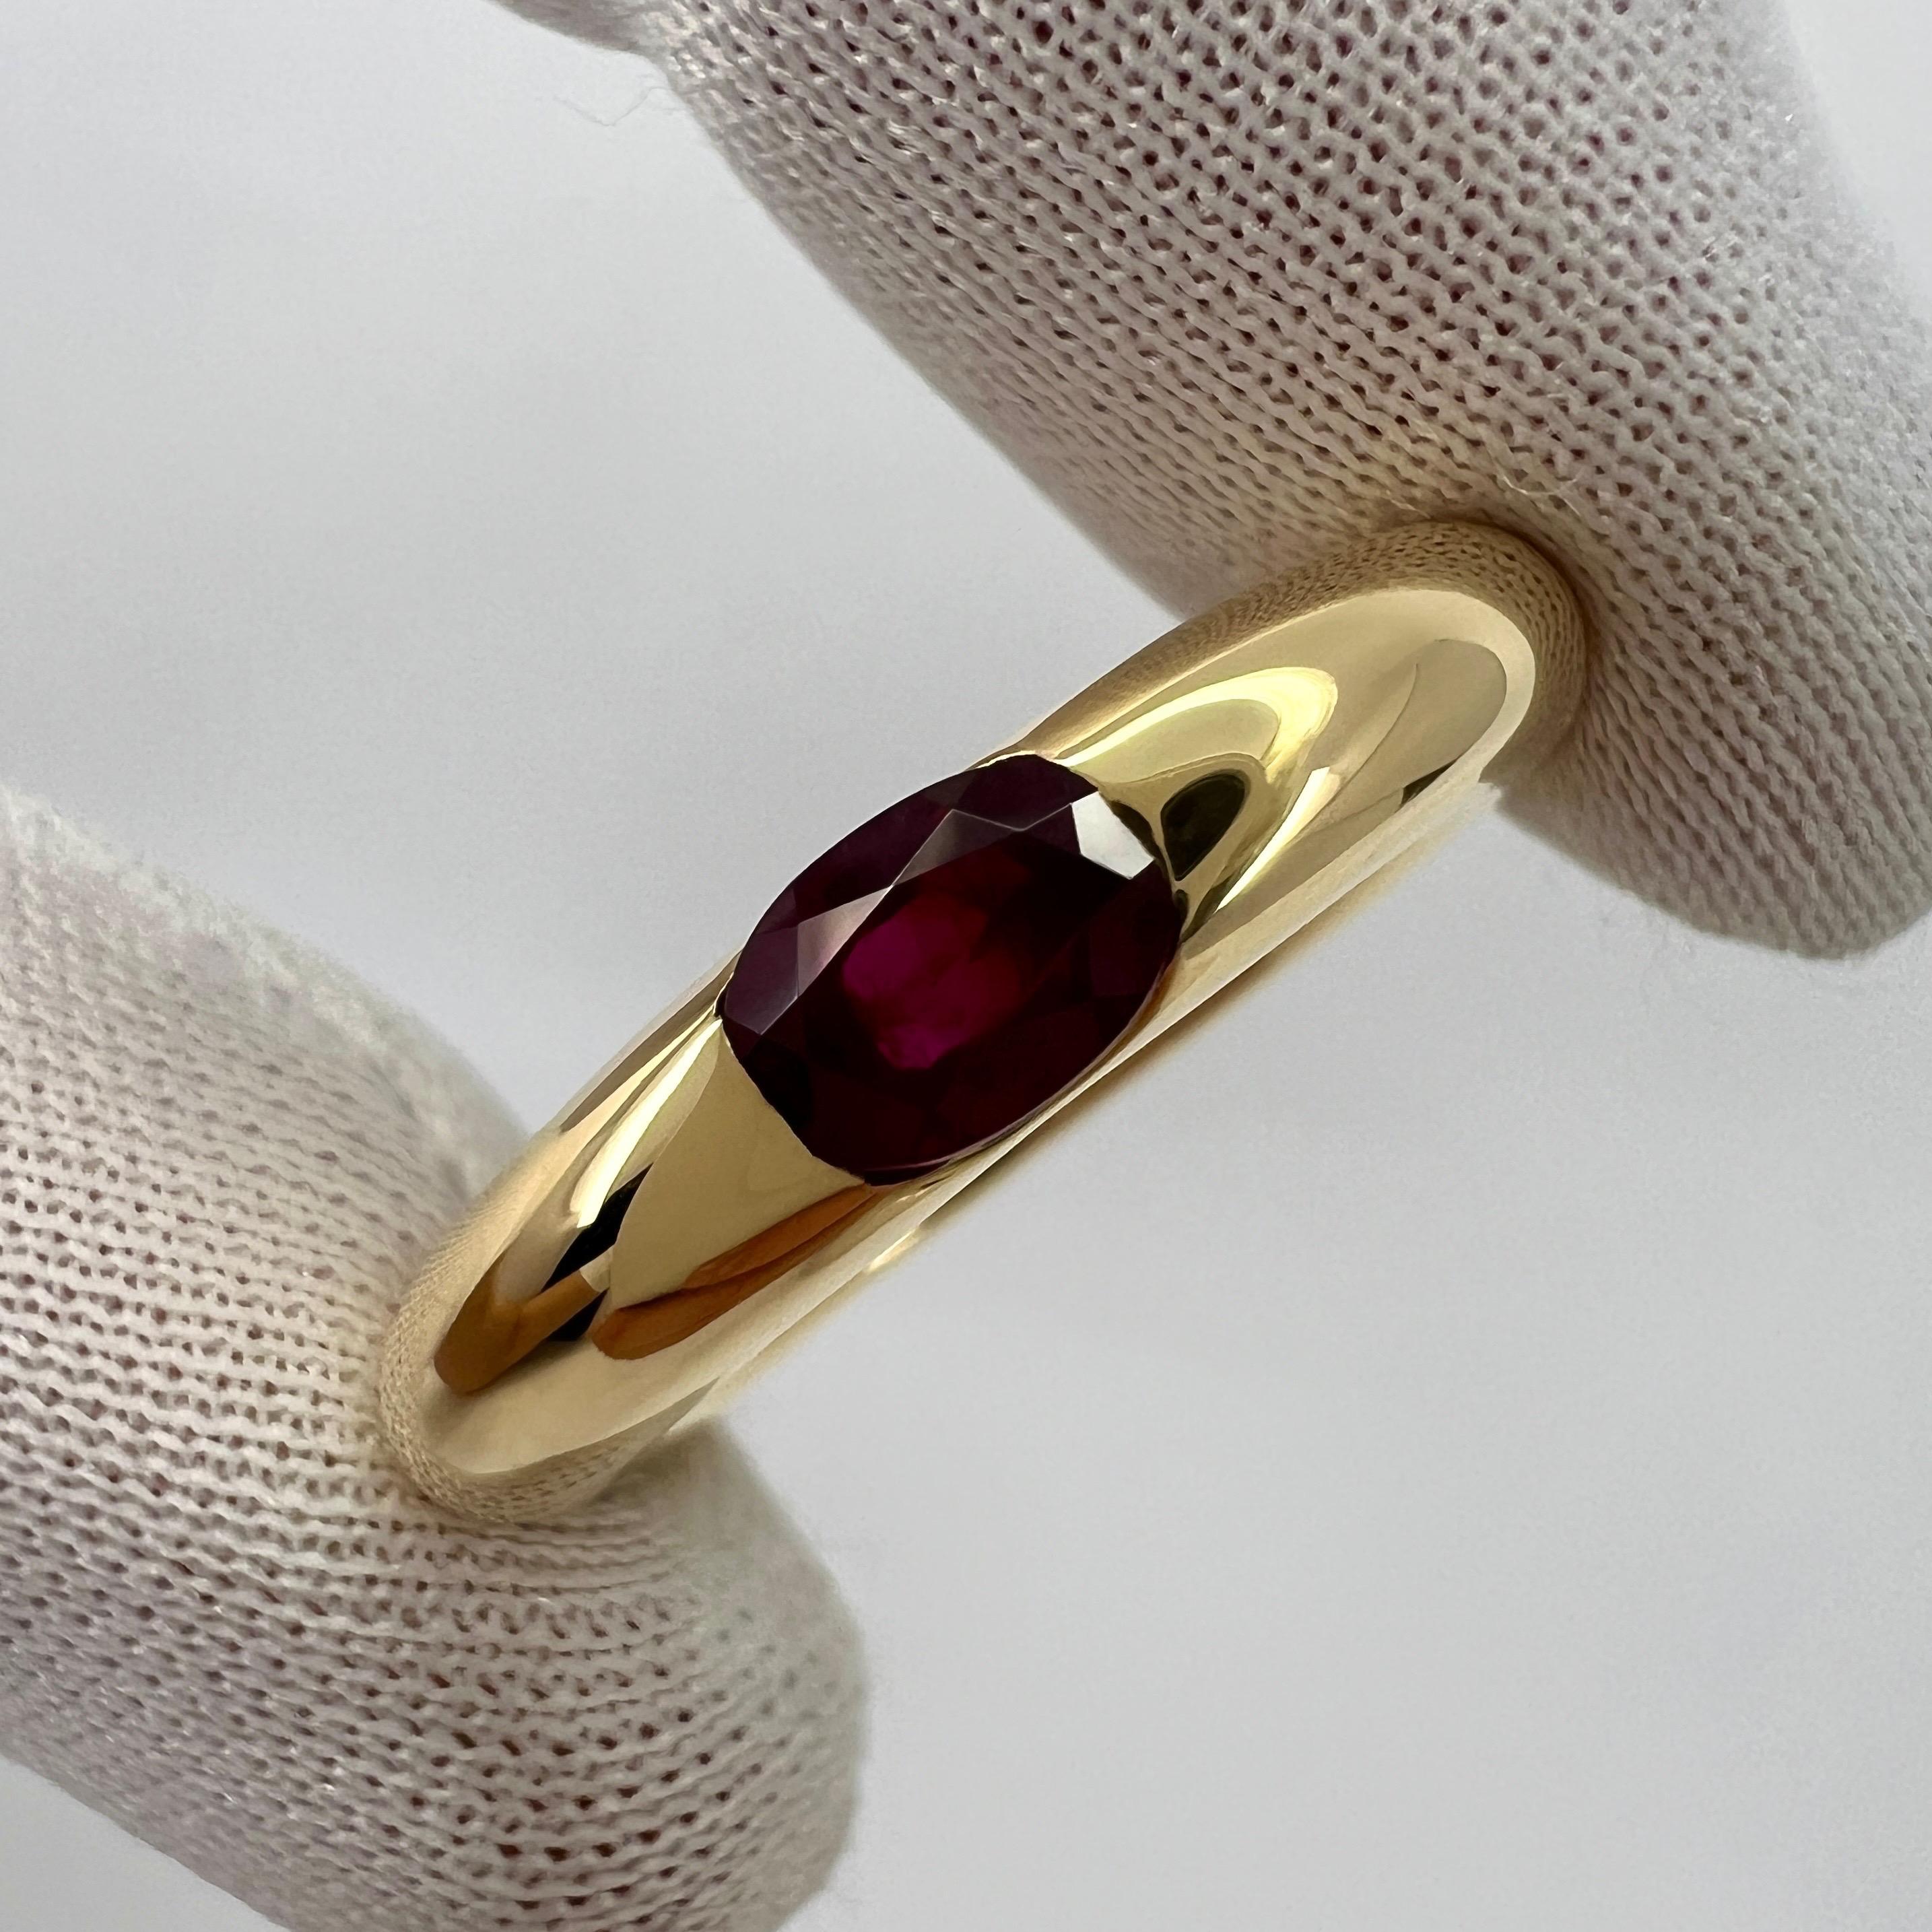 Vintage Cartier Deep Red Ruby Ellipse 18k Yellow Gold Oval Solitaire Ring 52 US6 5